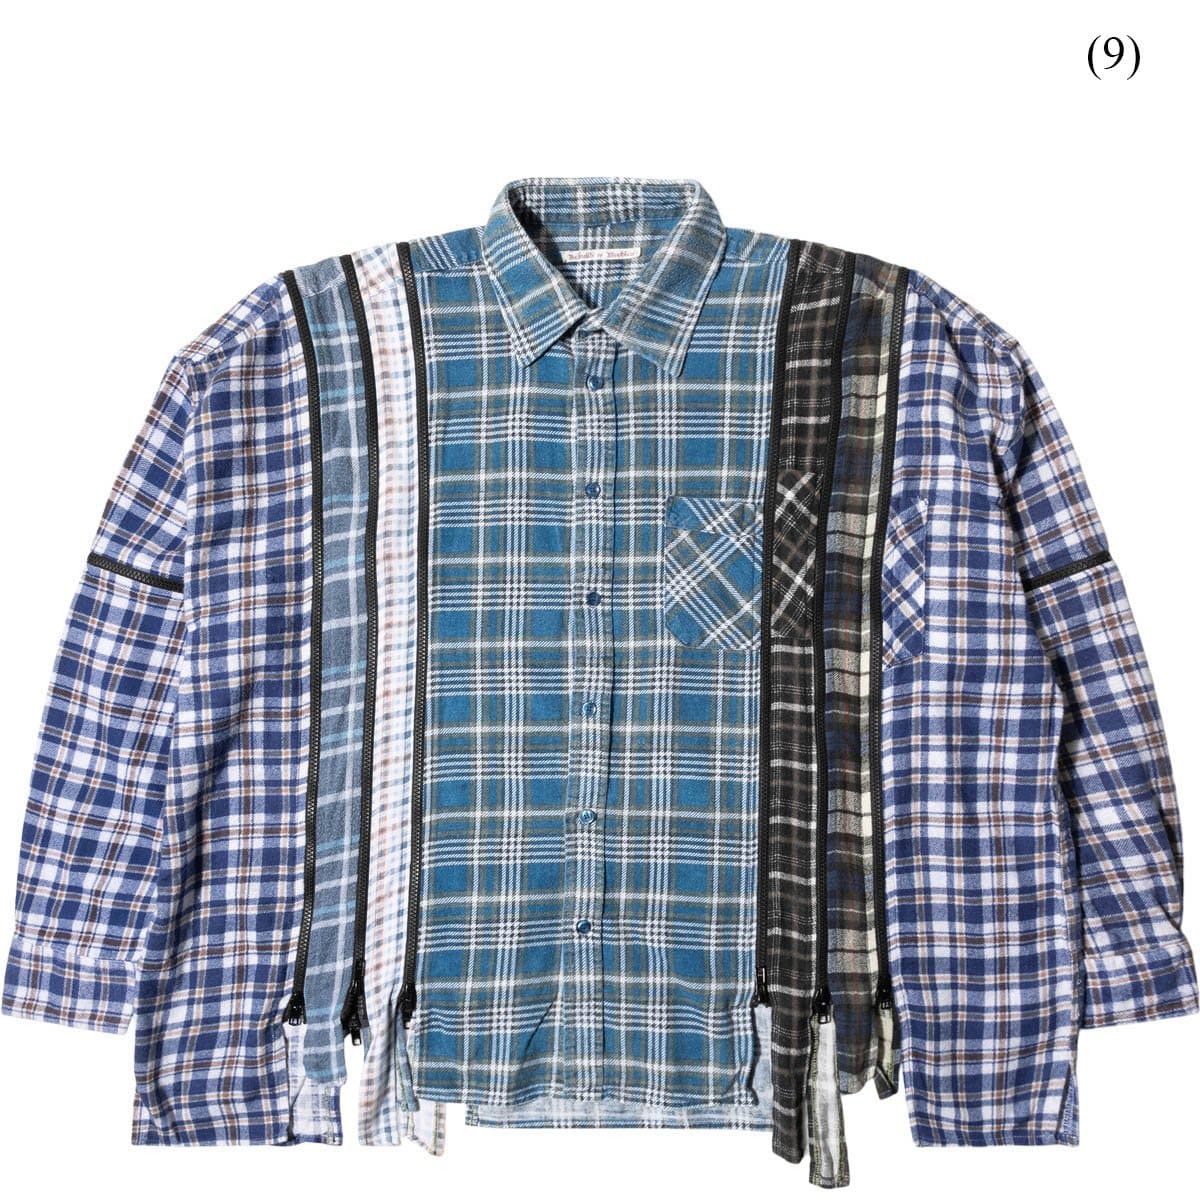 Needles Shirts 7 CUTS ZIPPED WIDE FLANNEL SHIRT FW21 (MULTIPLE OPTIONS)